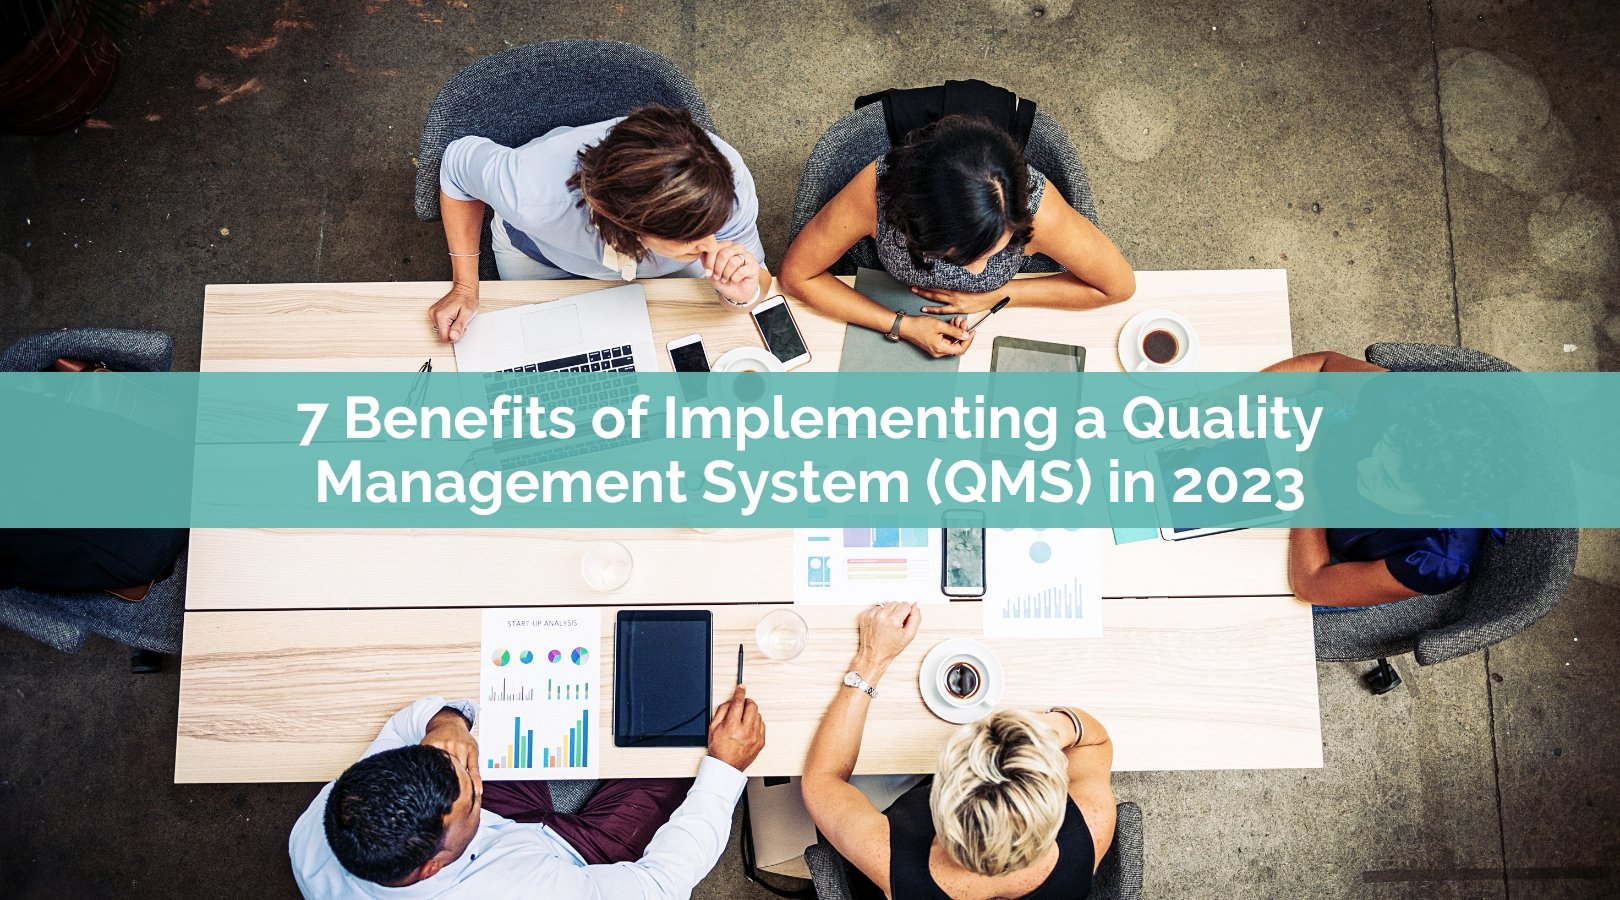 7 Benefits of Adding a Quality Management System (QMS) in 2023